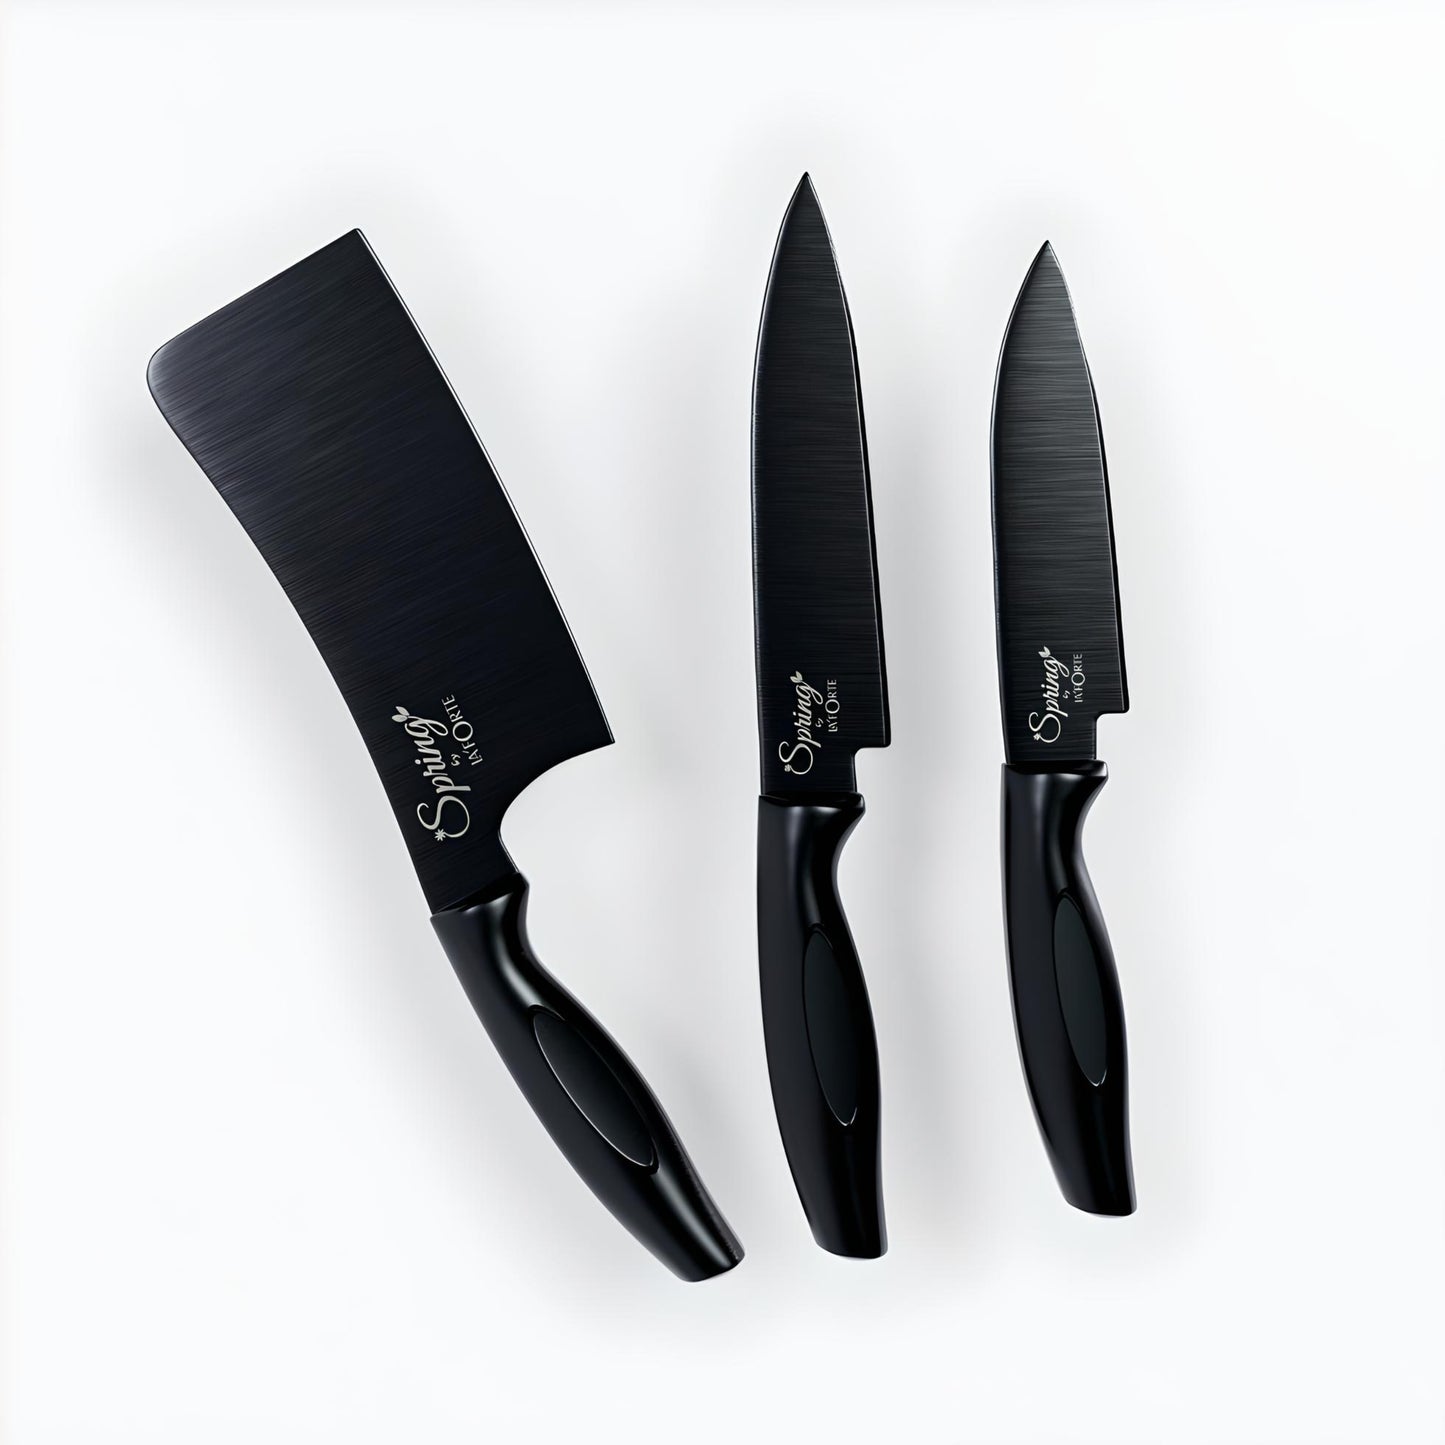 LA' FORTE Black Knife Set 3 Pieces, Sharp Cooking Knife Set with Cleaver (Extreme Sturdiness and Superior Longevity)